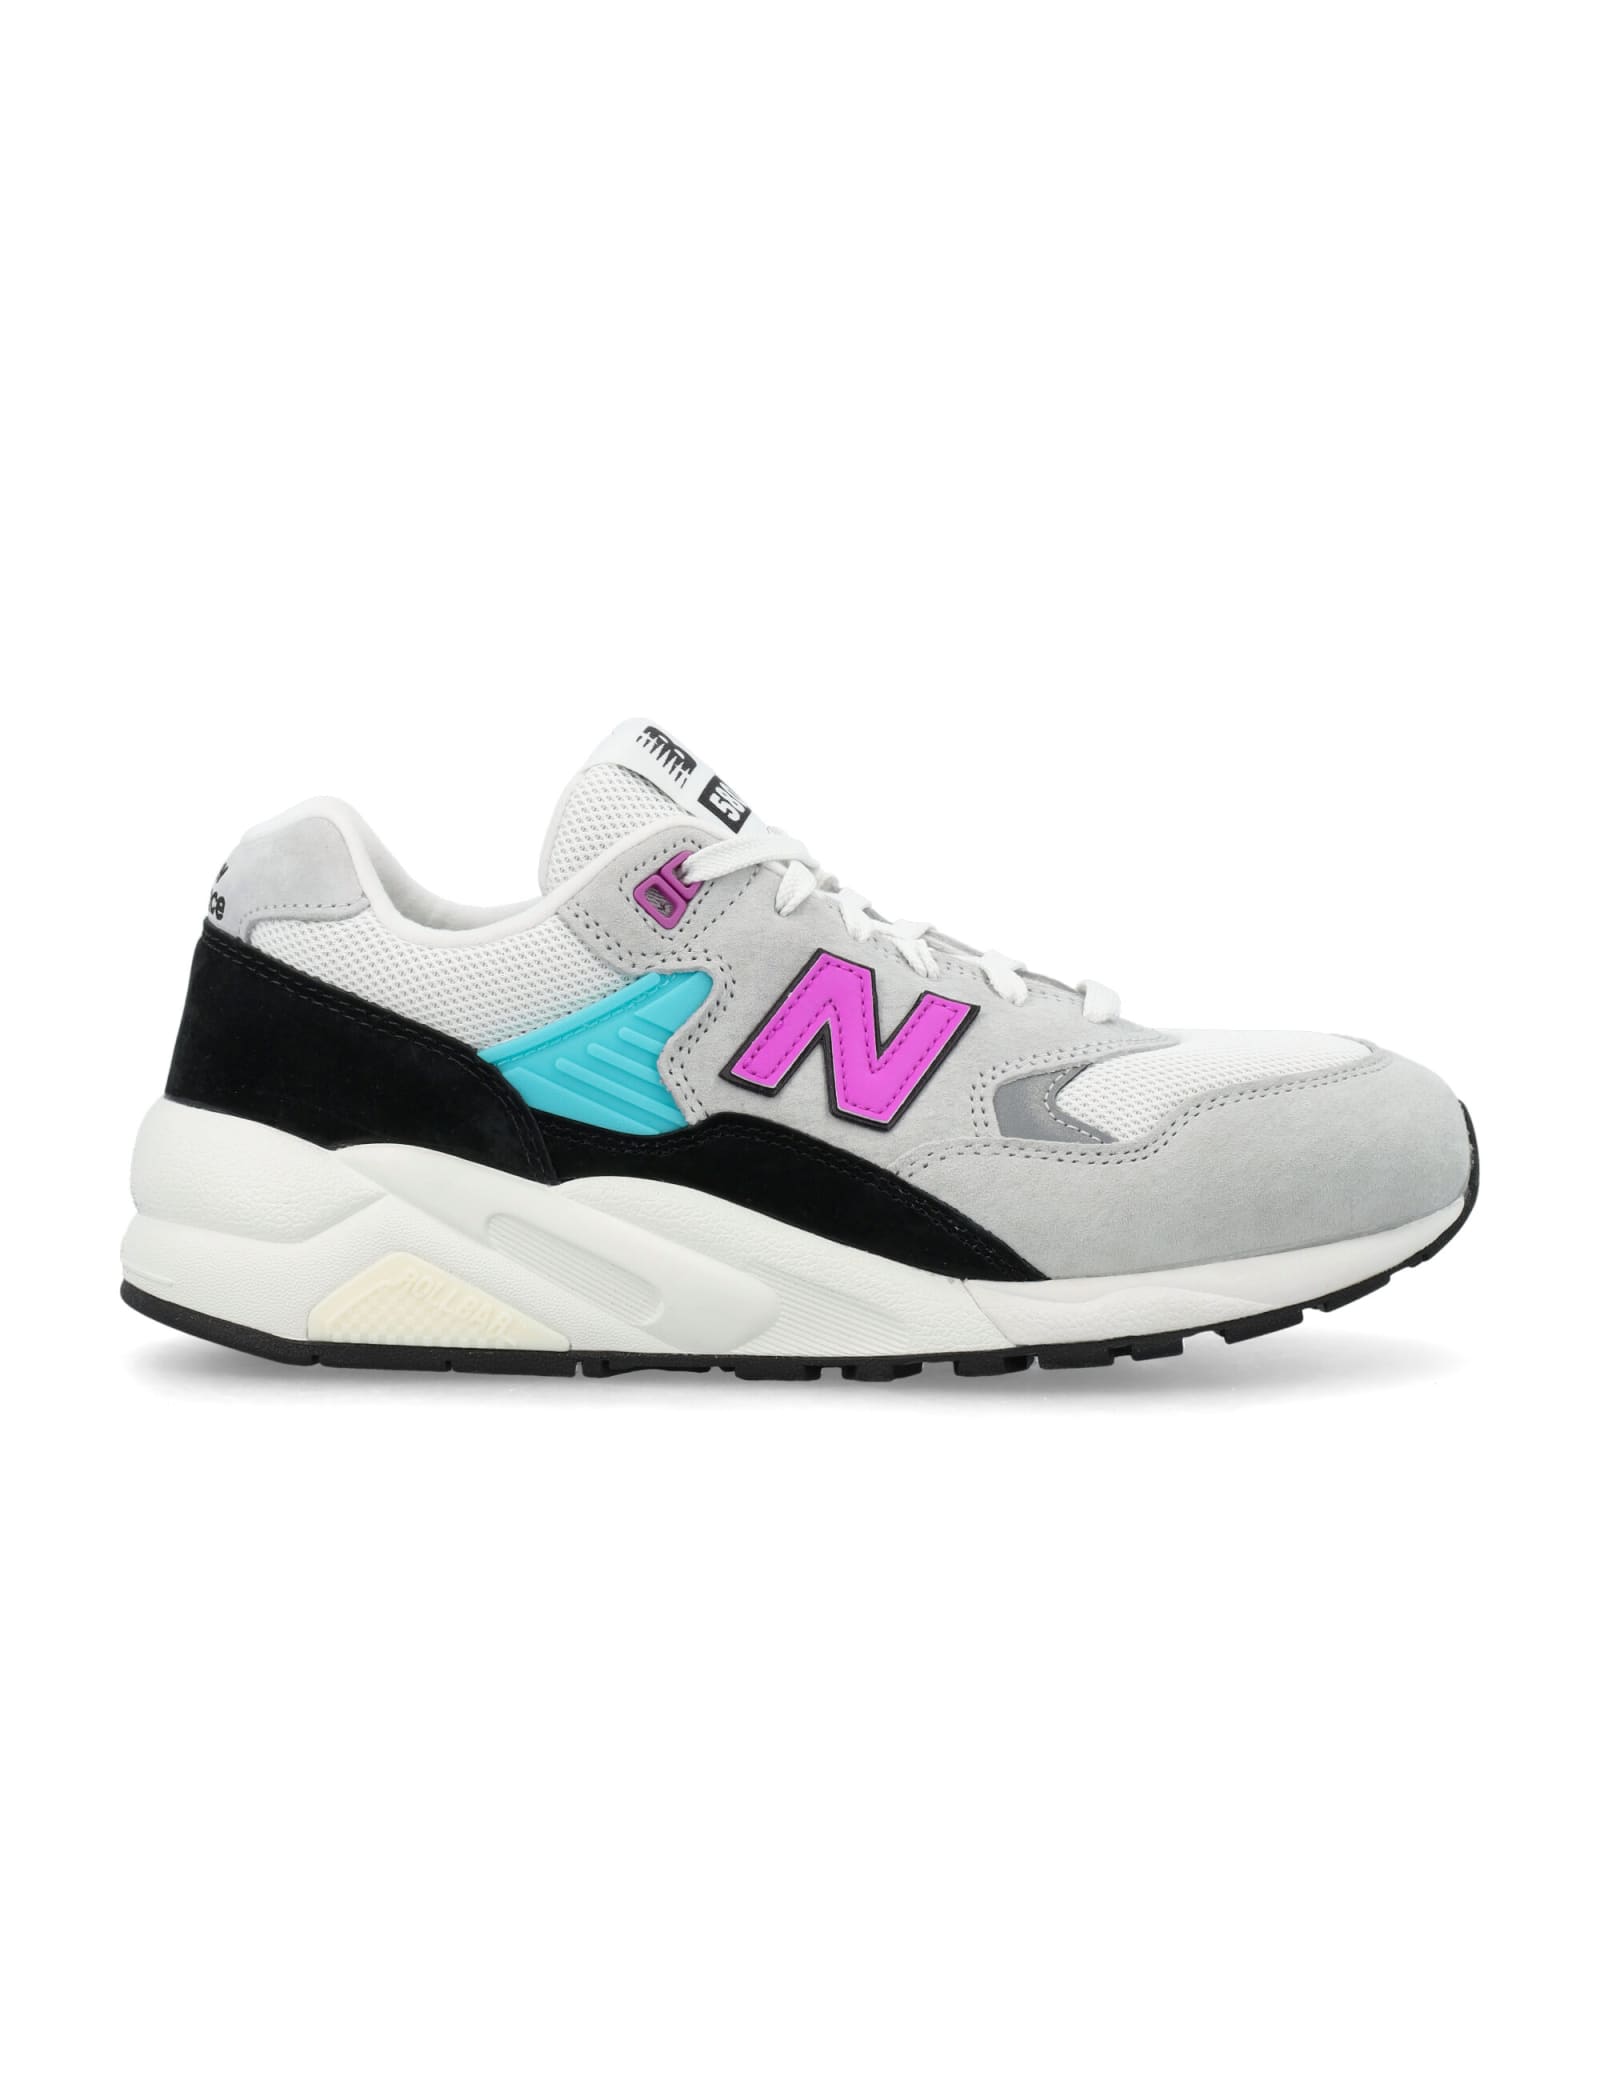 NEW BALANCE 580 LOW TOP SNEAKERS